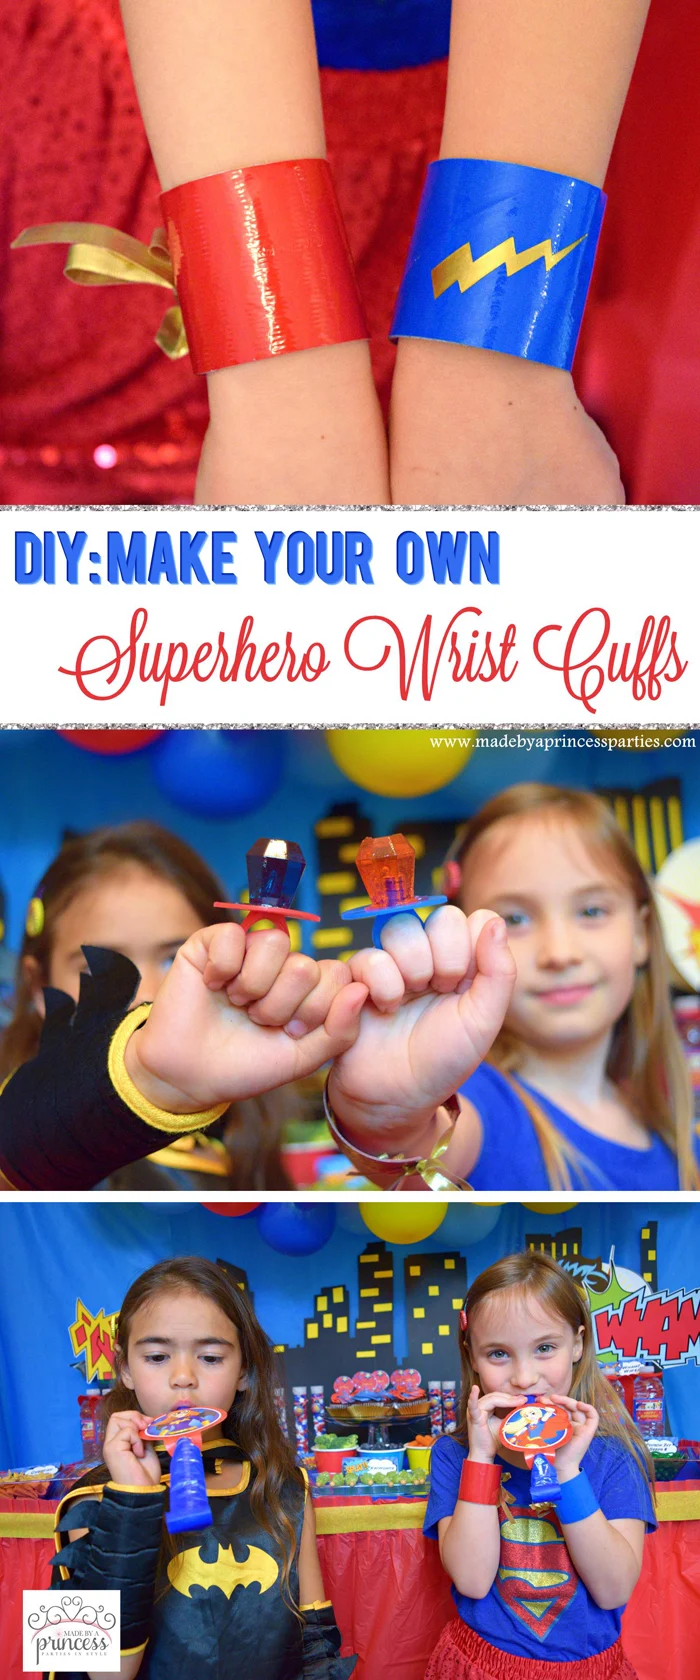 Party-Costume-Idea-How-to-Make-Superhero-Cuffs-pin-it